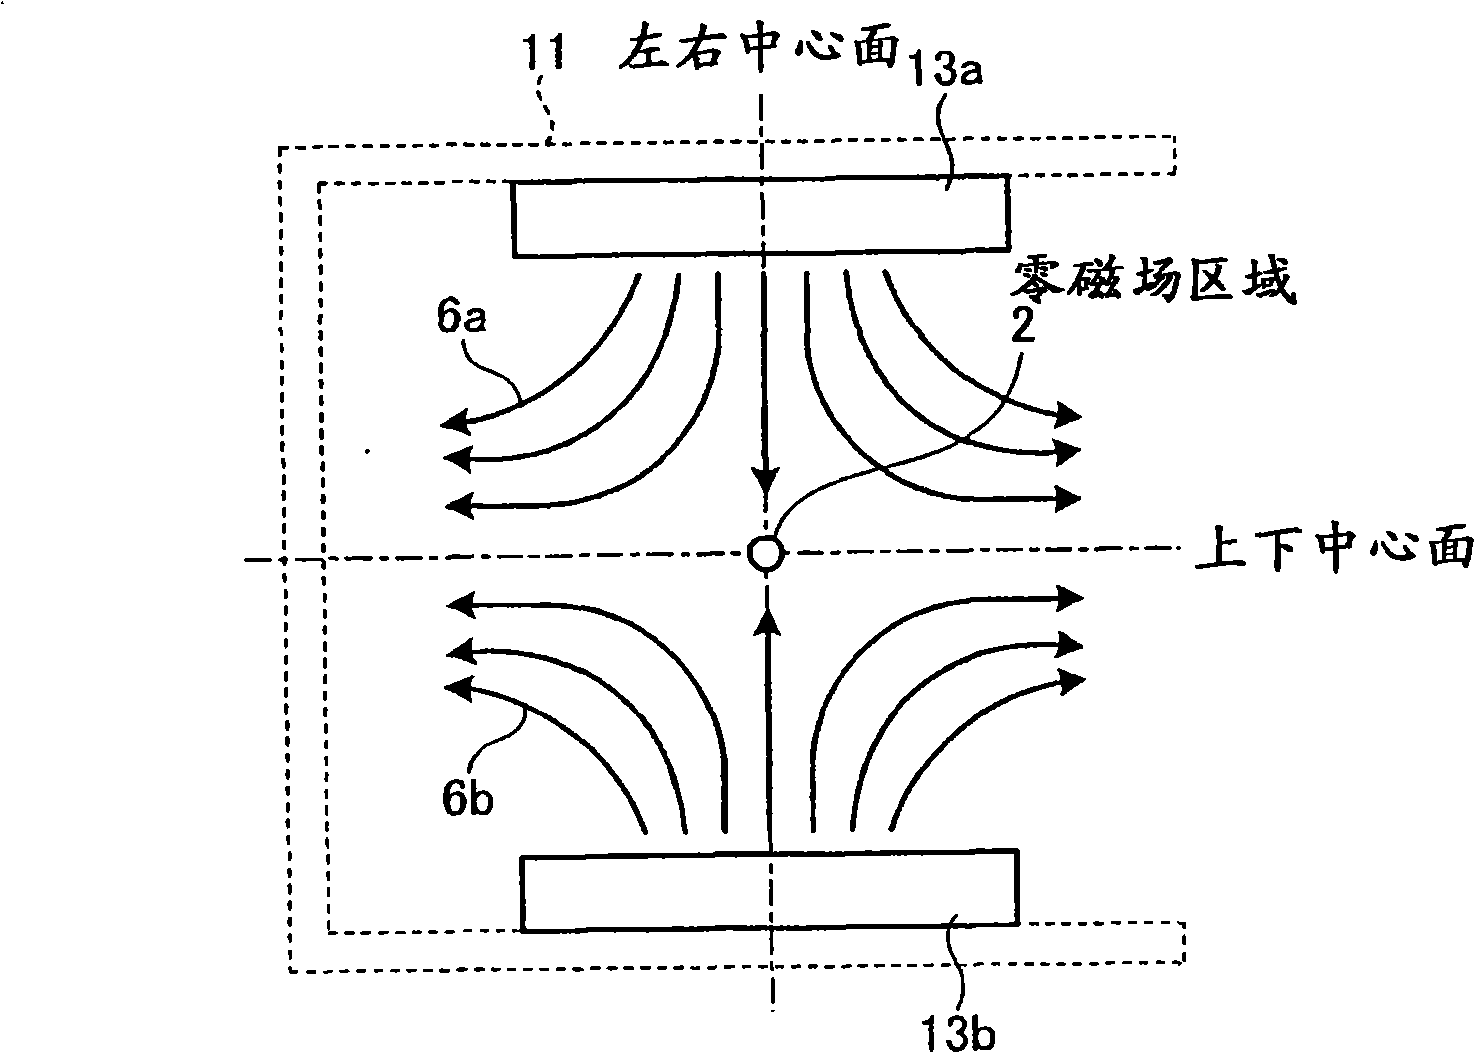 Magnetic particle imaging apparatus, method of disposing detection coil for magnetic particle imaging apparatus, and magnetic flux detecting apparatus